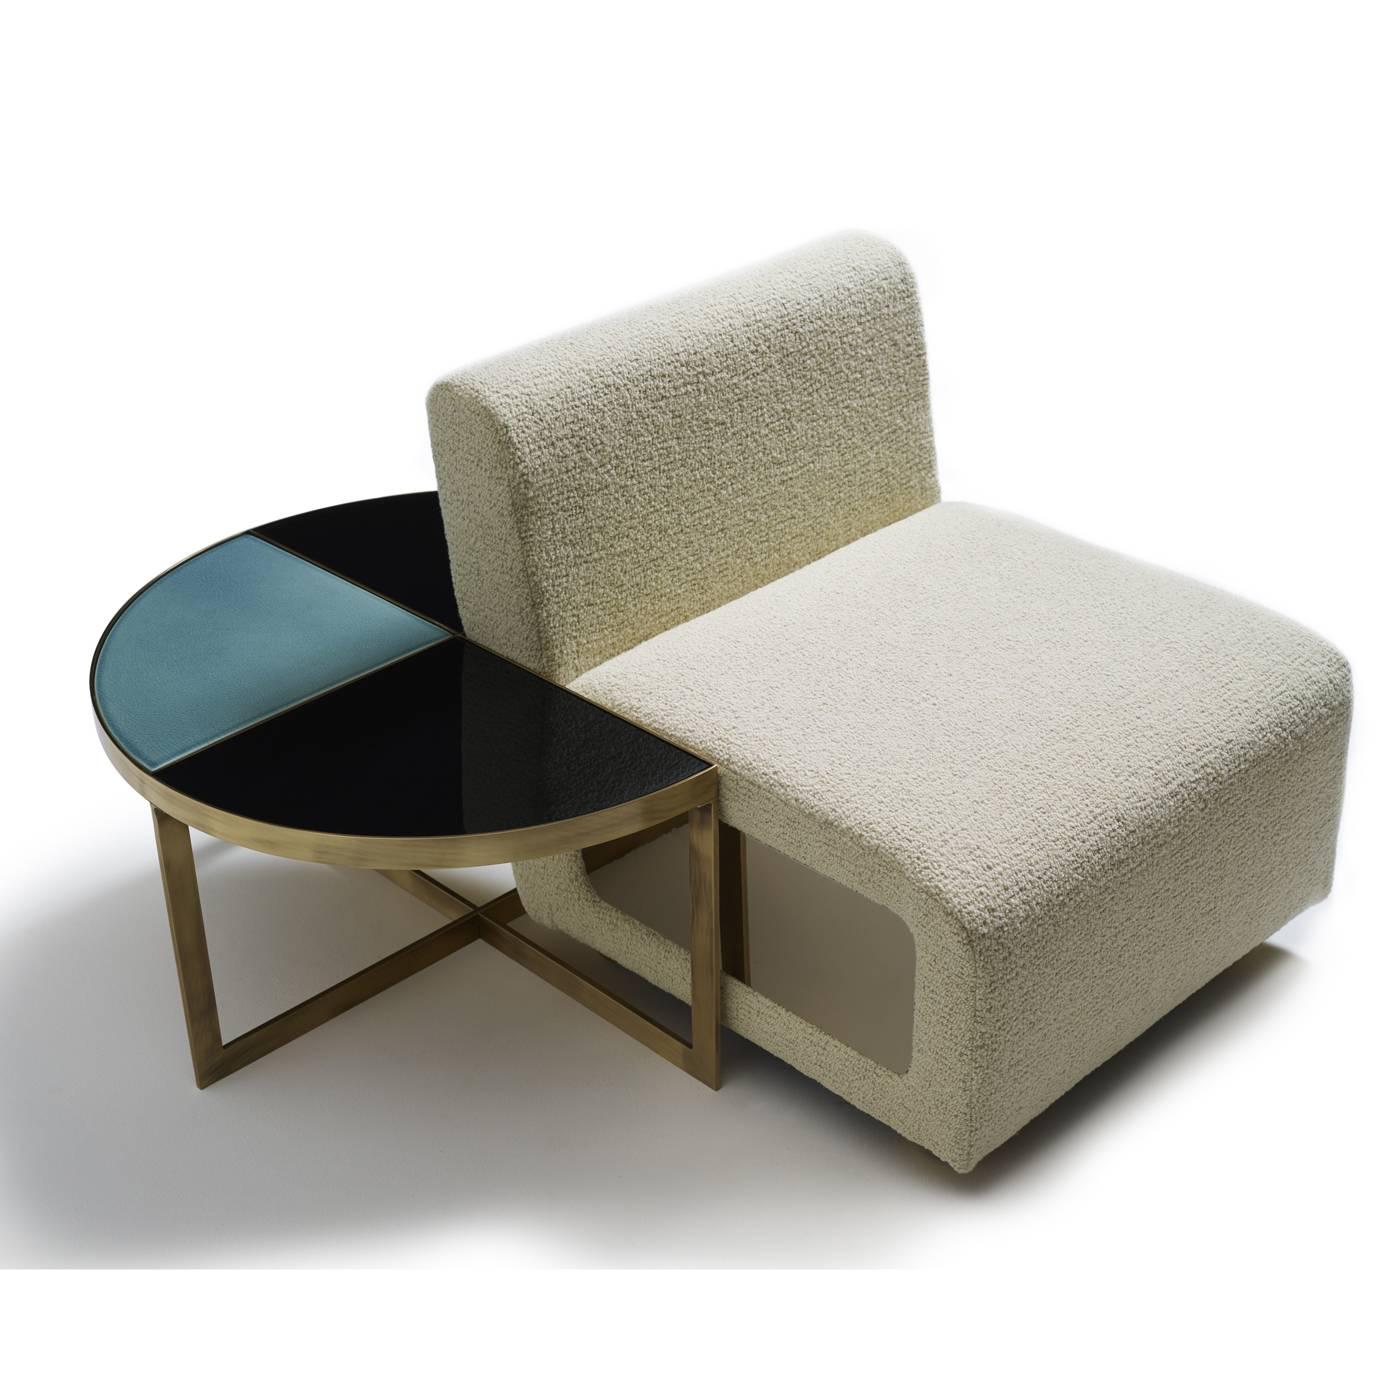 This charming coffee table, designed by Piero Angelo Orecchioni for Marioni, has a round top with one quadrant missing. This unique shape serves a practical storage purpose and allows for the table to be placed up against a couch or another piece of